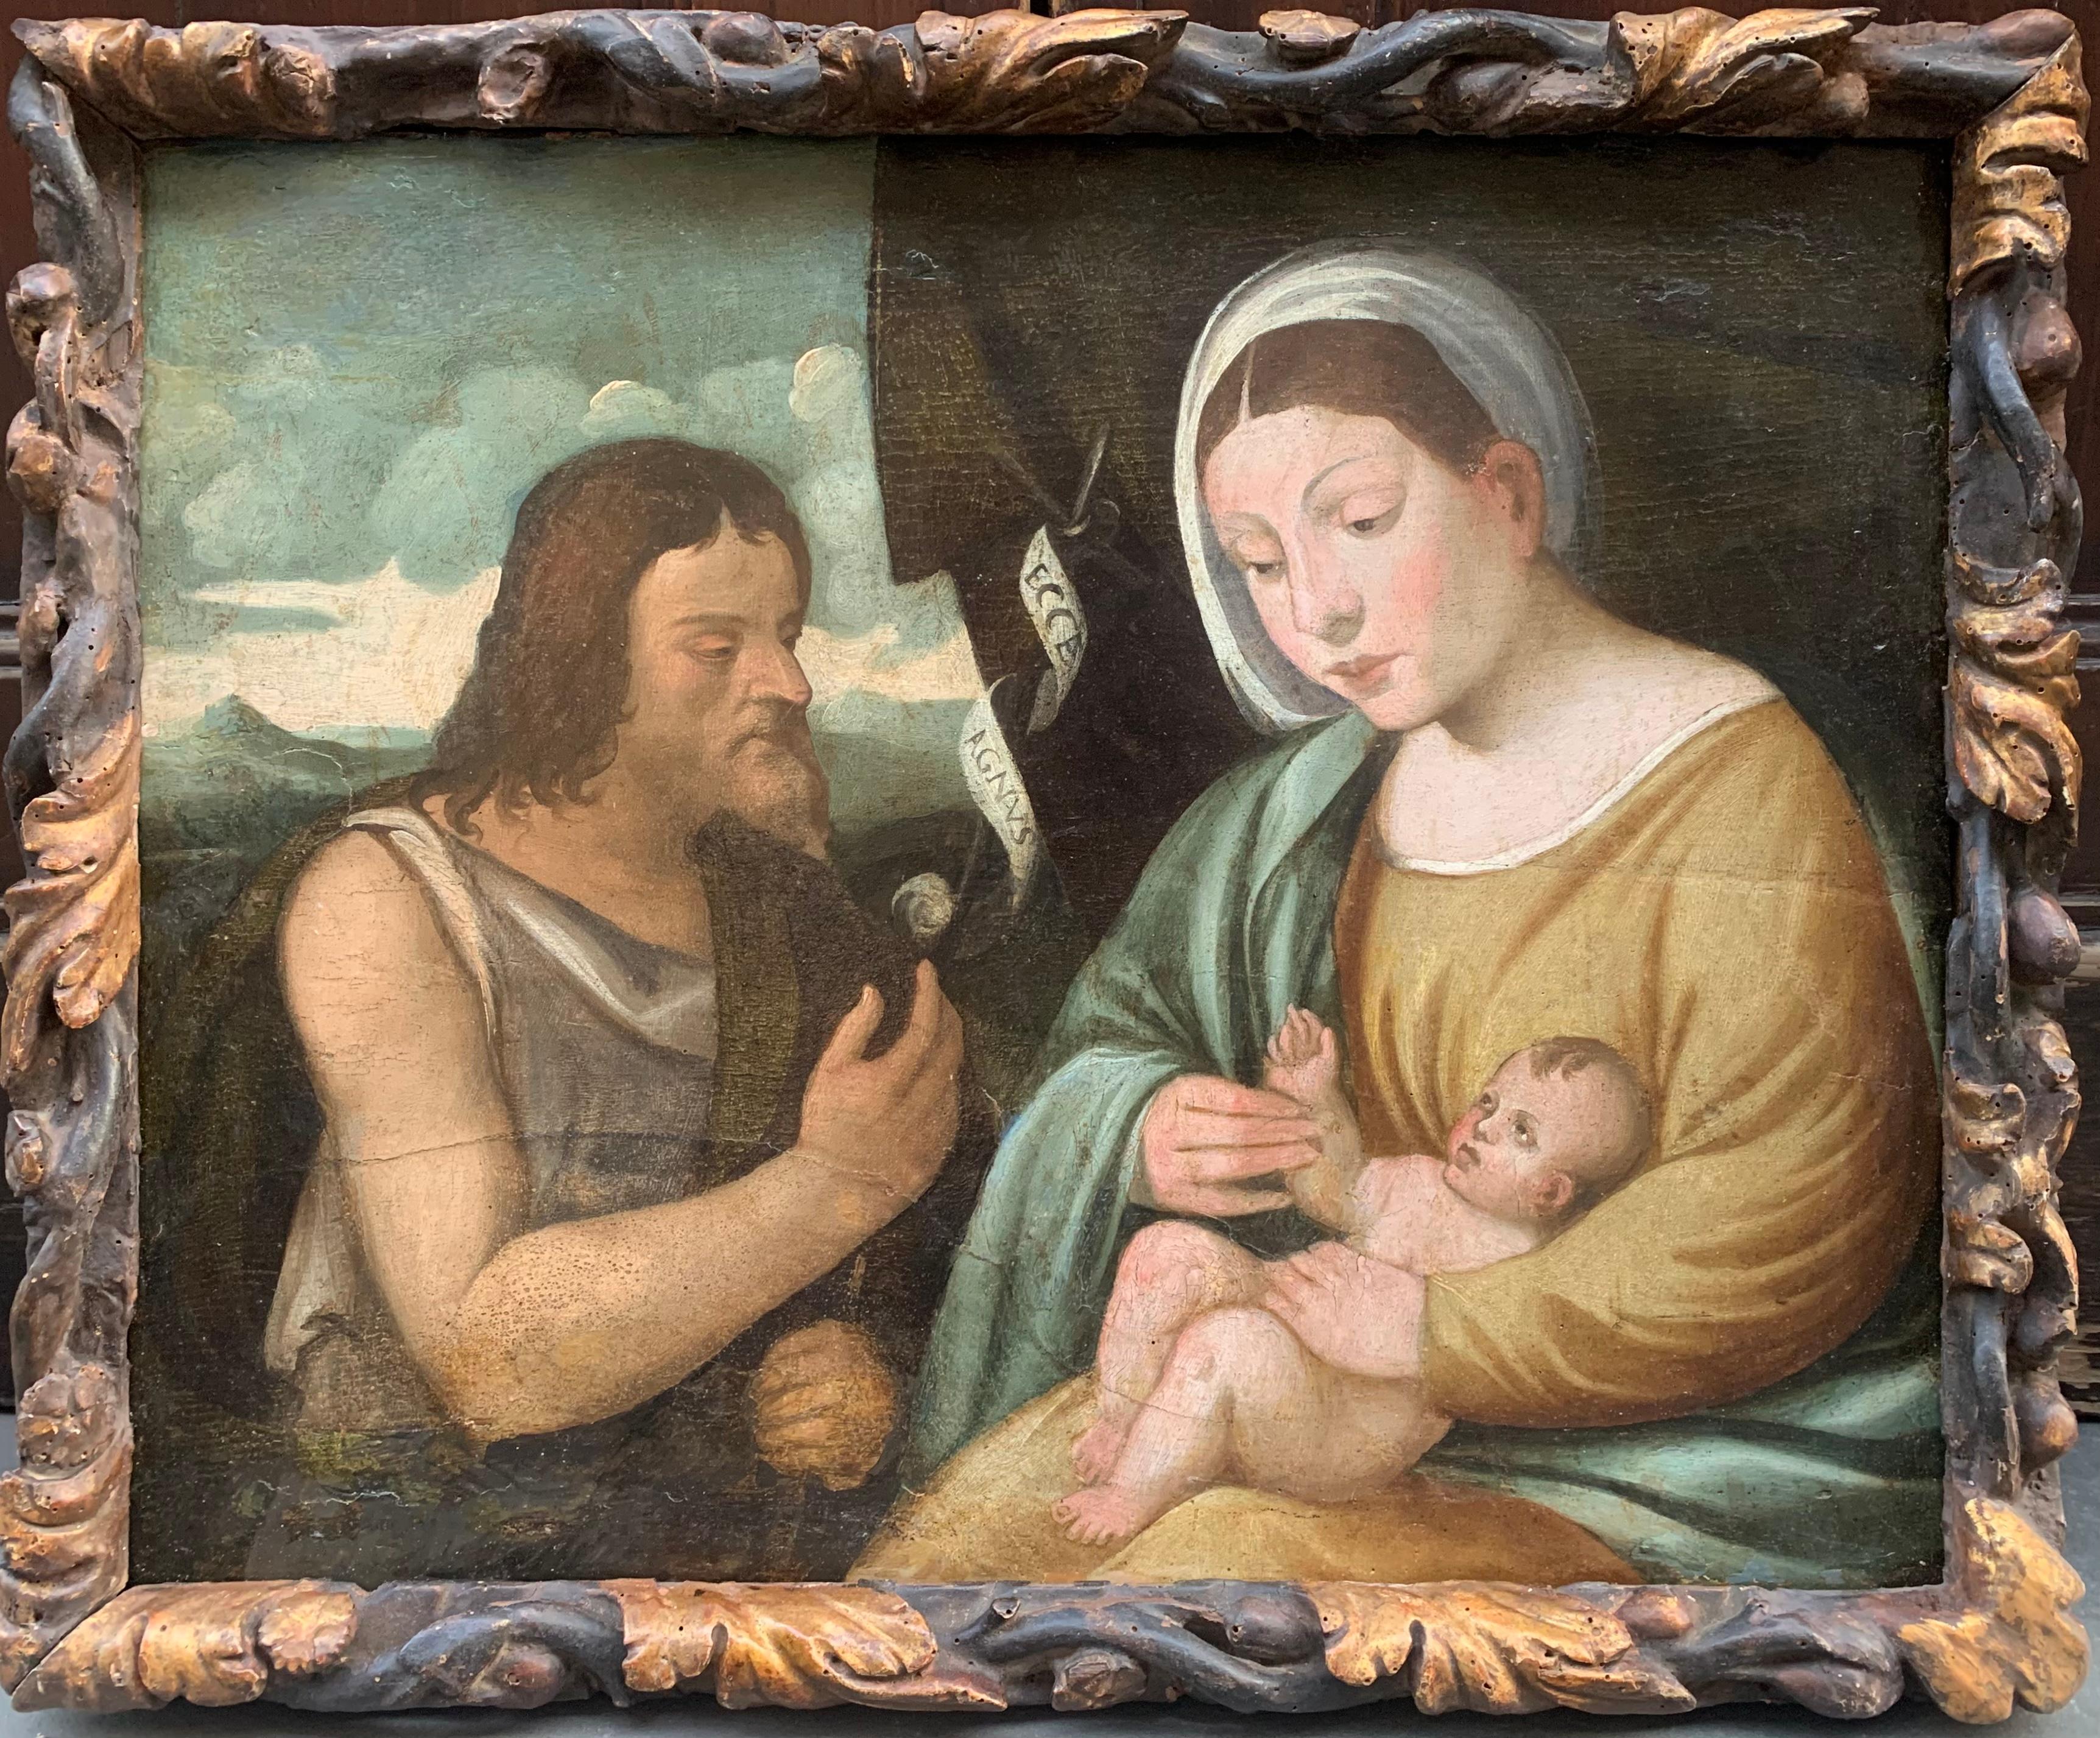 Unknown Figurative Painting - Venice. XVI century. Madonna with child with St. John. Attrib. Marco Bello. 